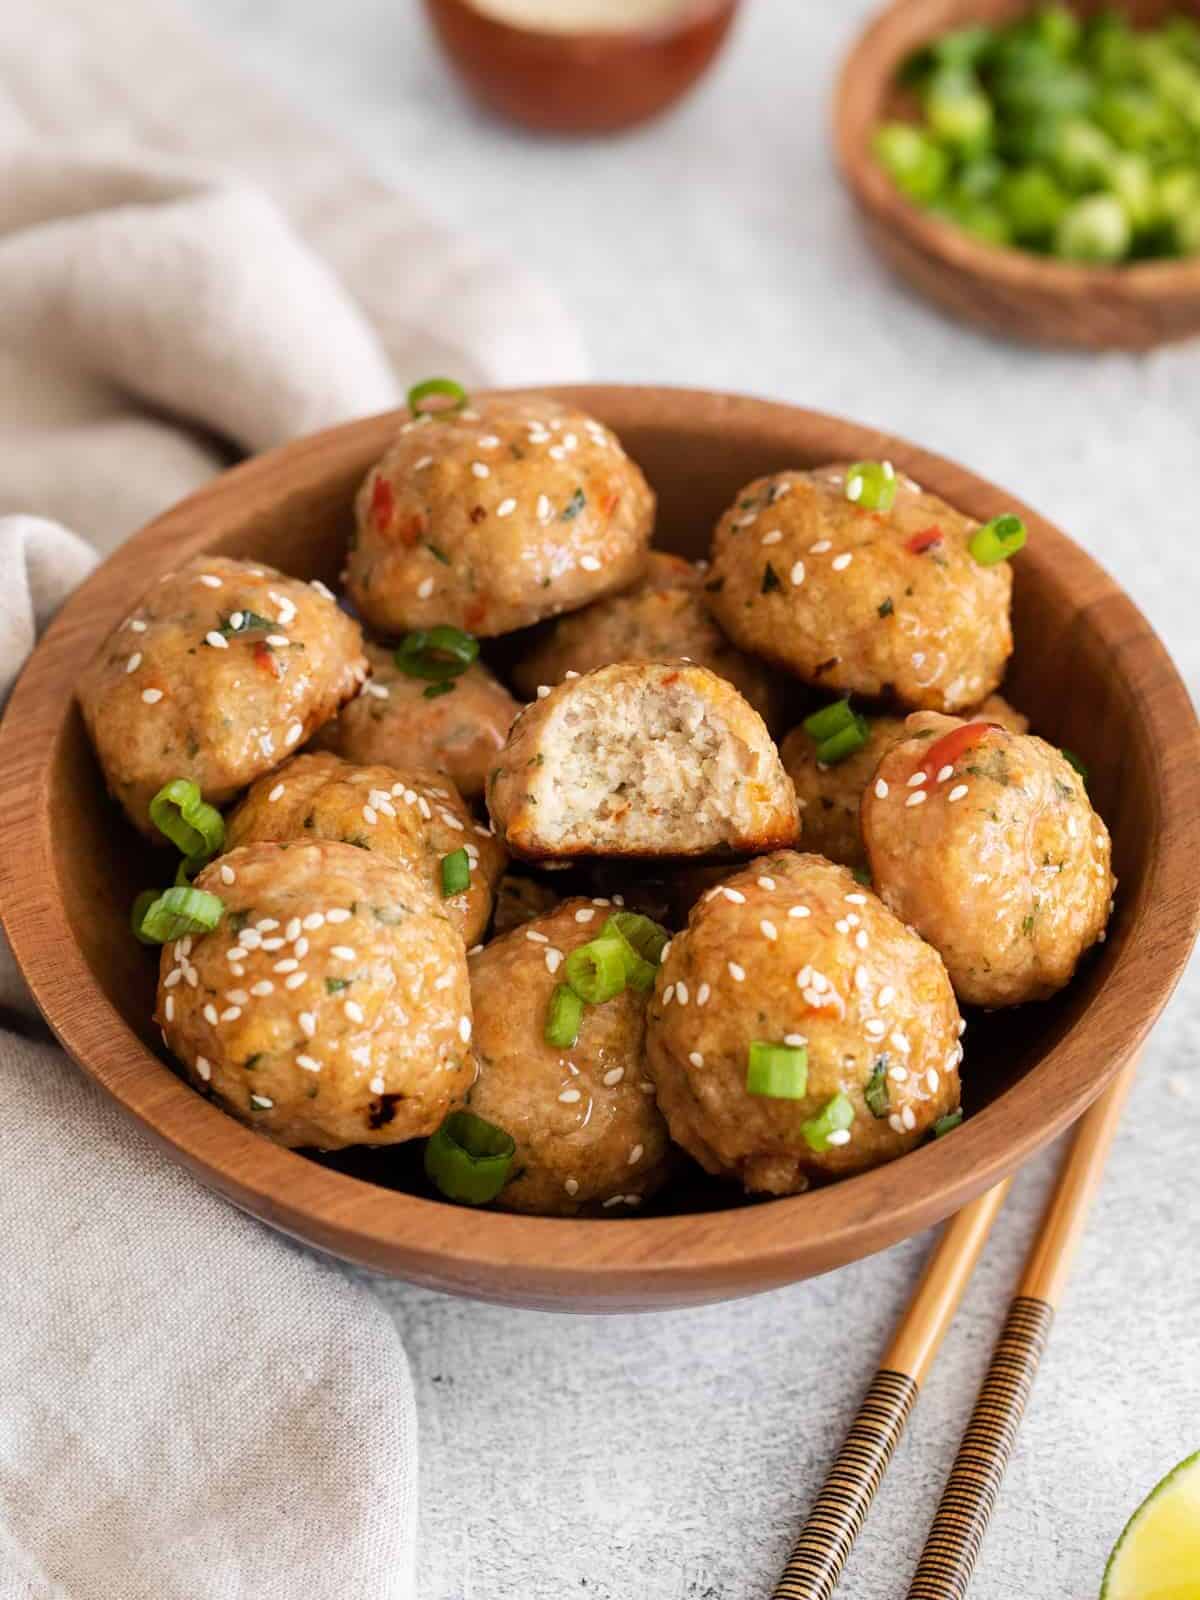 a bowl of chicken meatballs covered in sweet chili sauce, one has a bite taken out of it